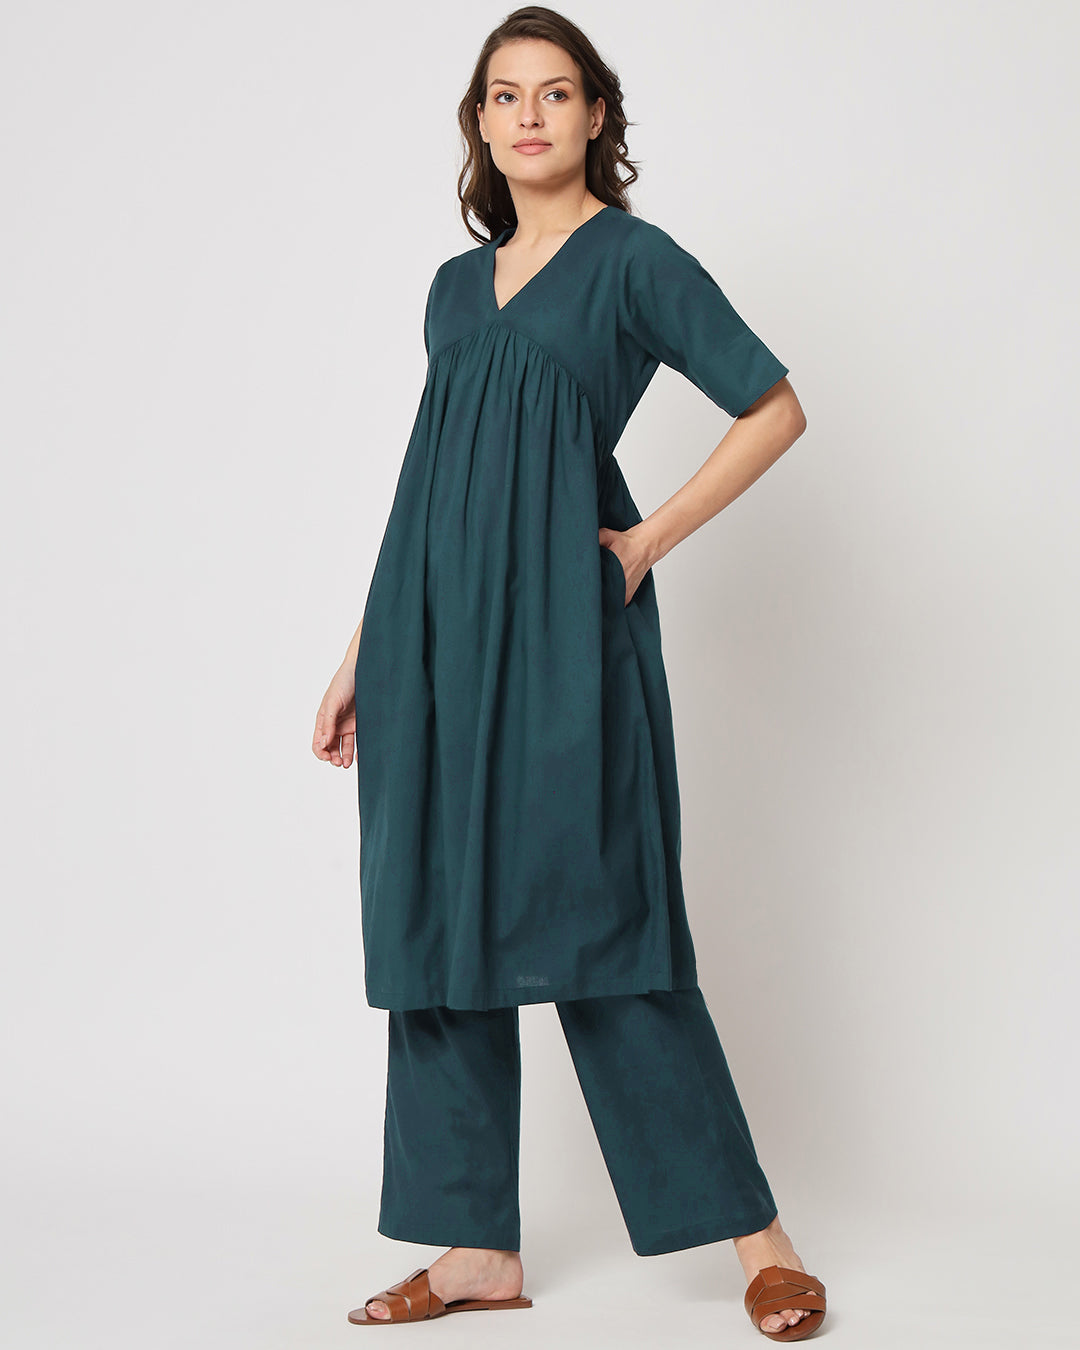 Deep Teal Gathered Solid Kurta (Without Bottoms)